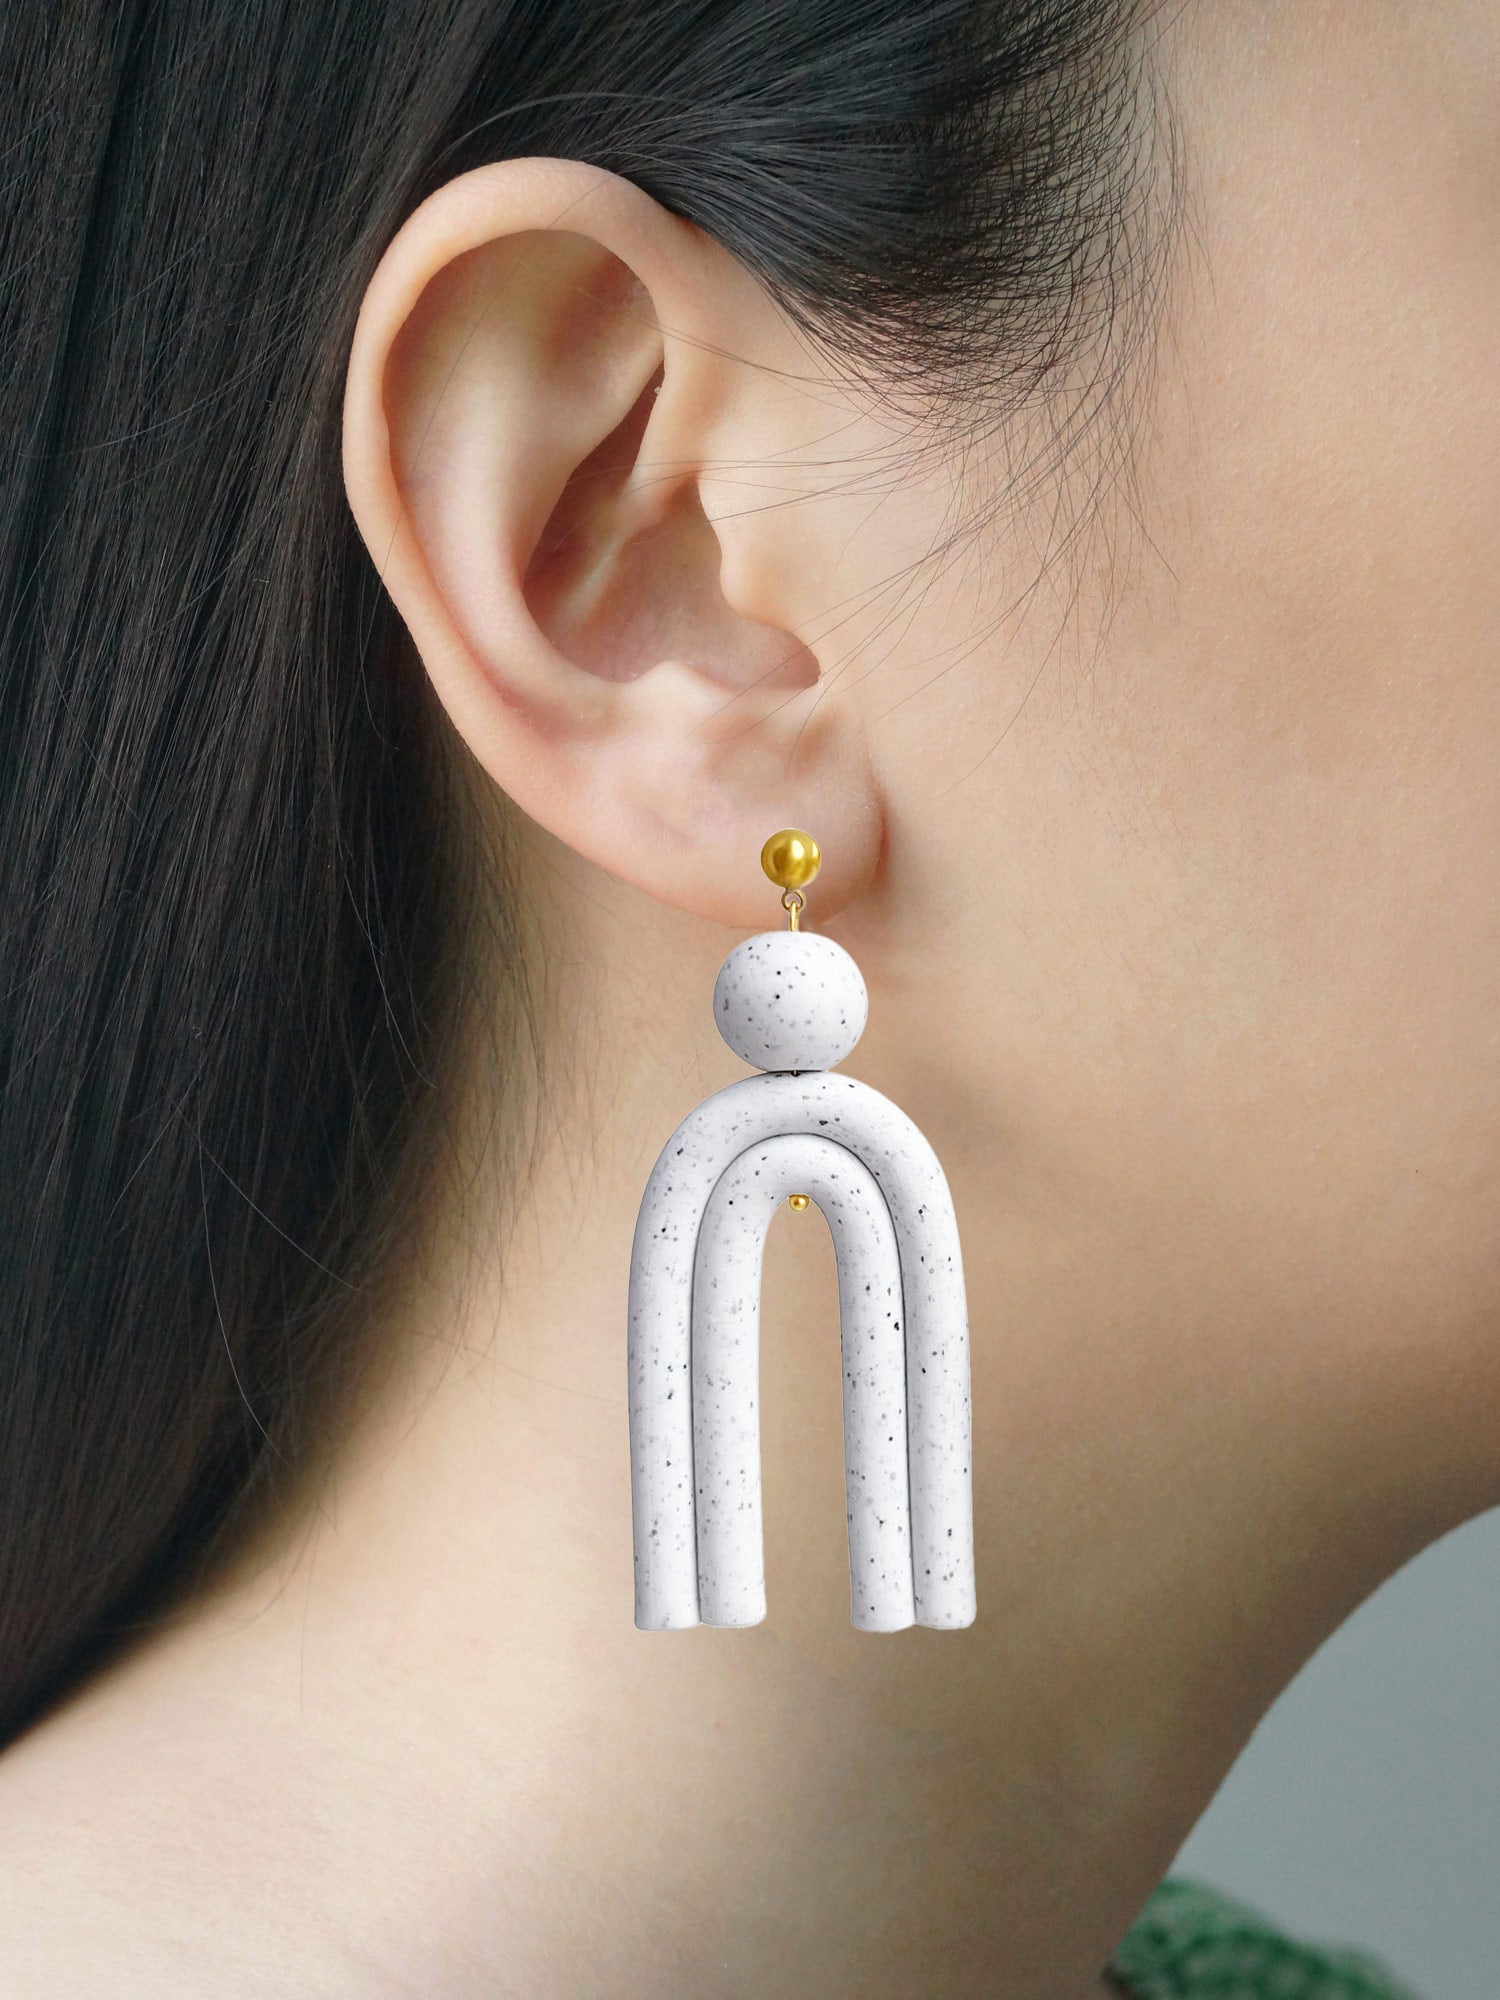 Geometric Earrings with Long Arch - White Speckles